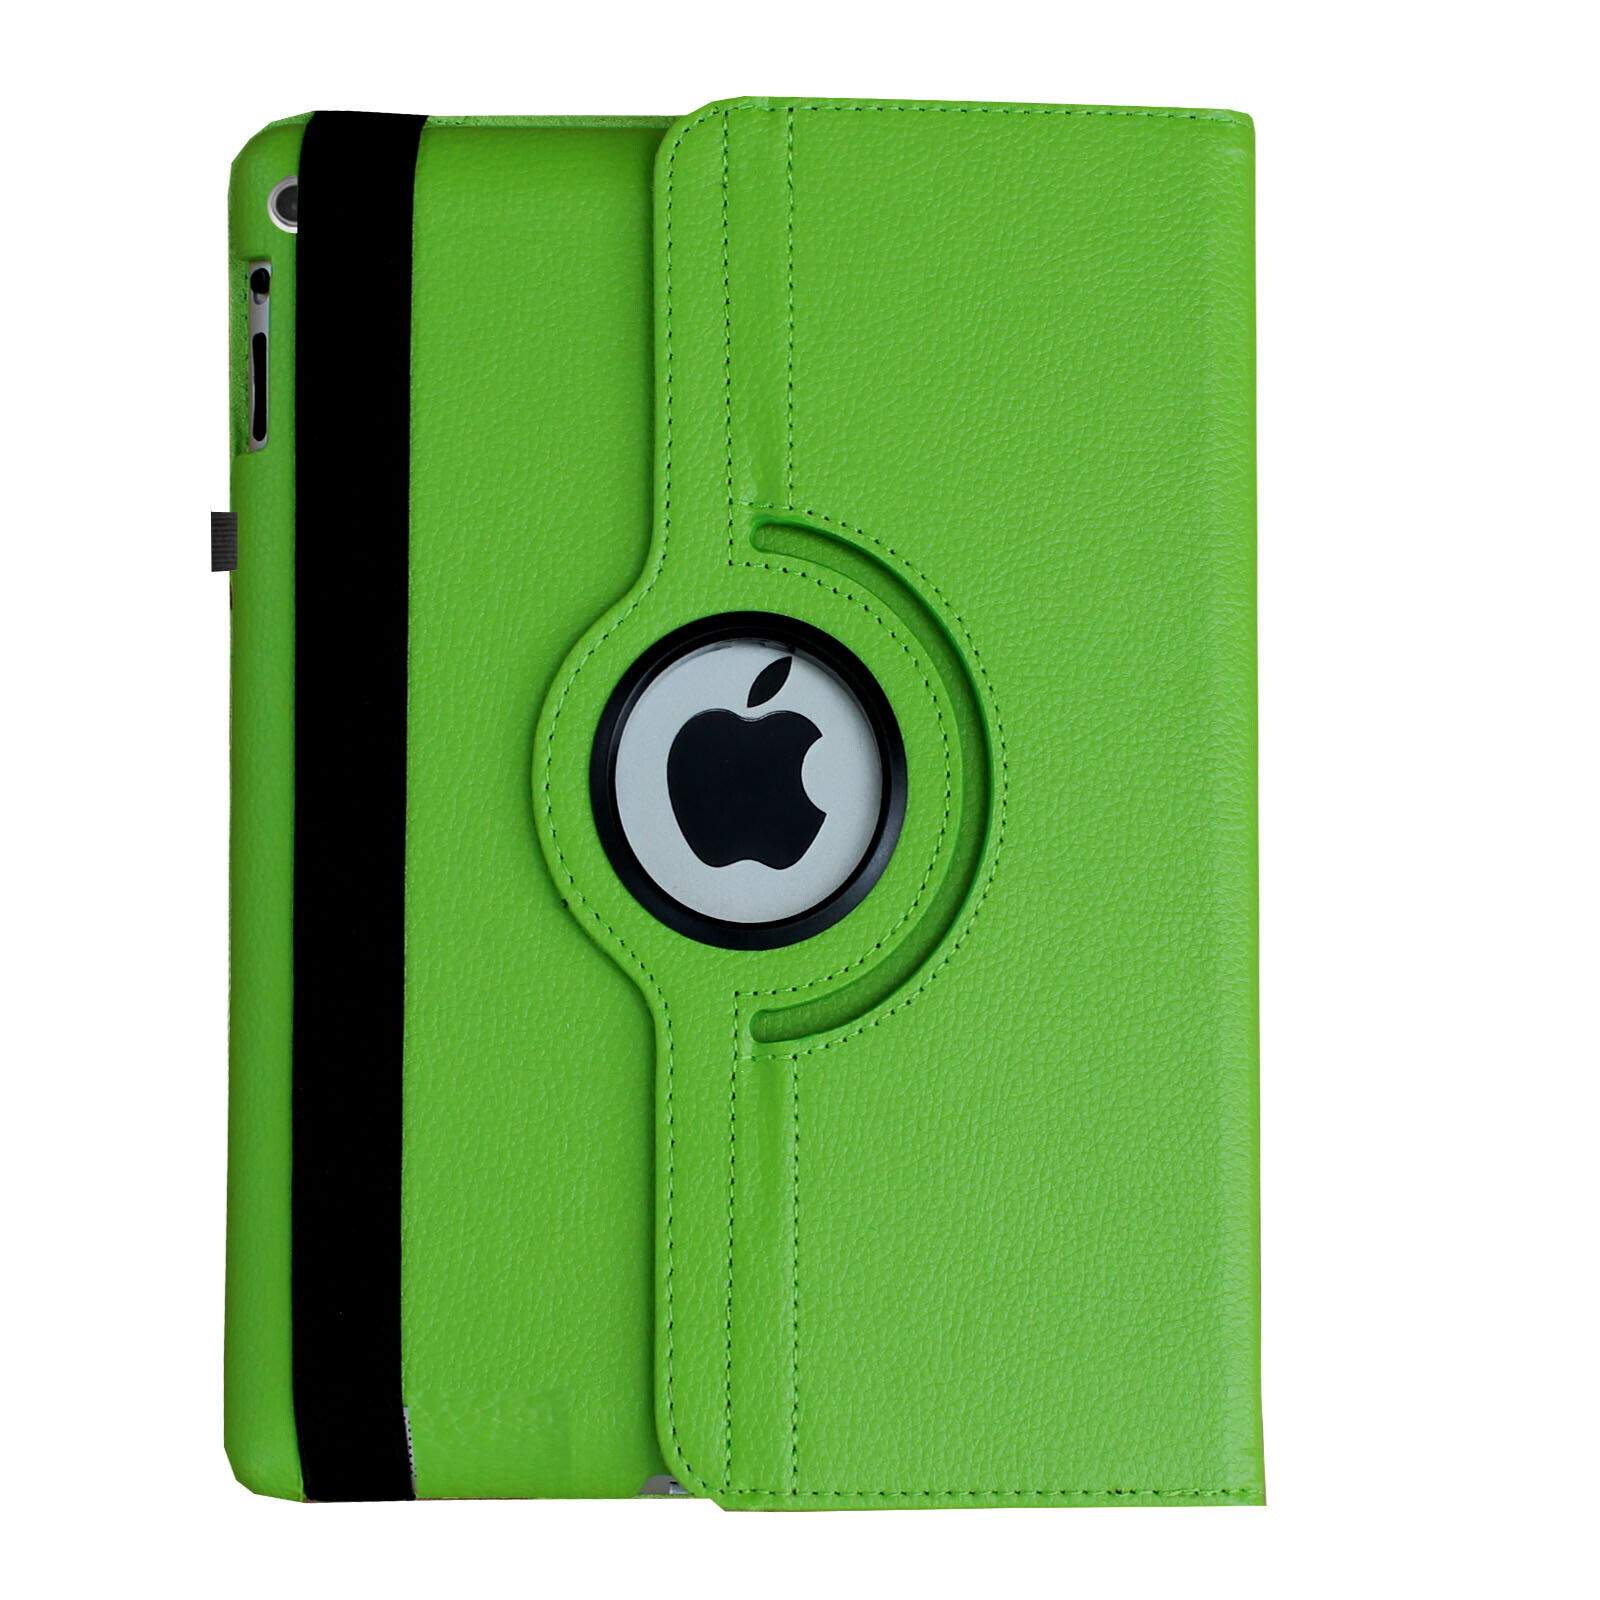 JYtrend Case for iPad 6th 5th Gen 9.7 Inch Smart Rotating cover with Pen Holder